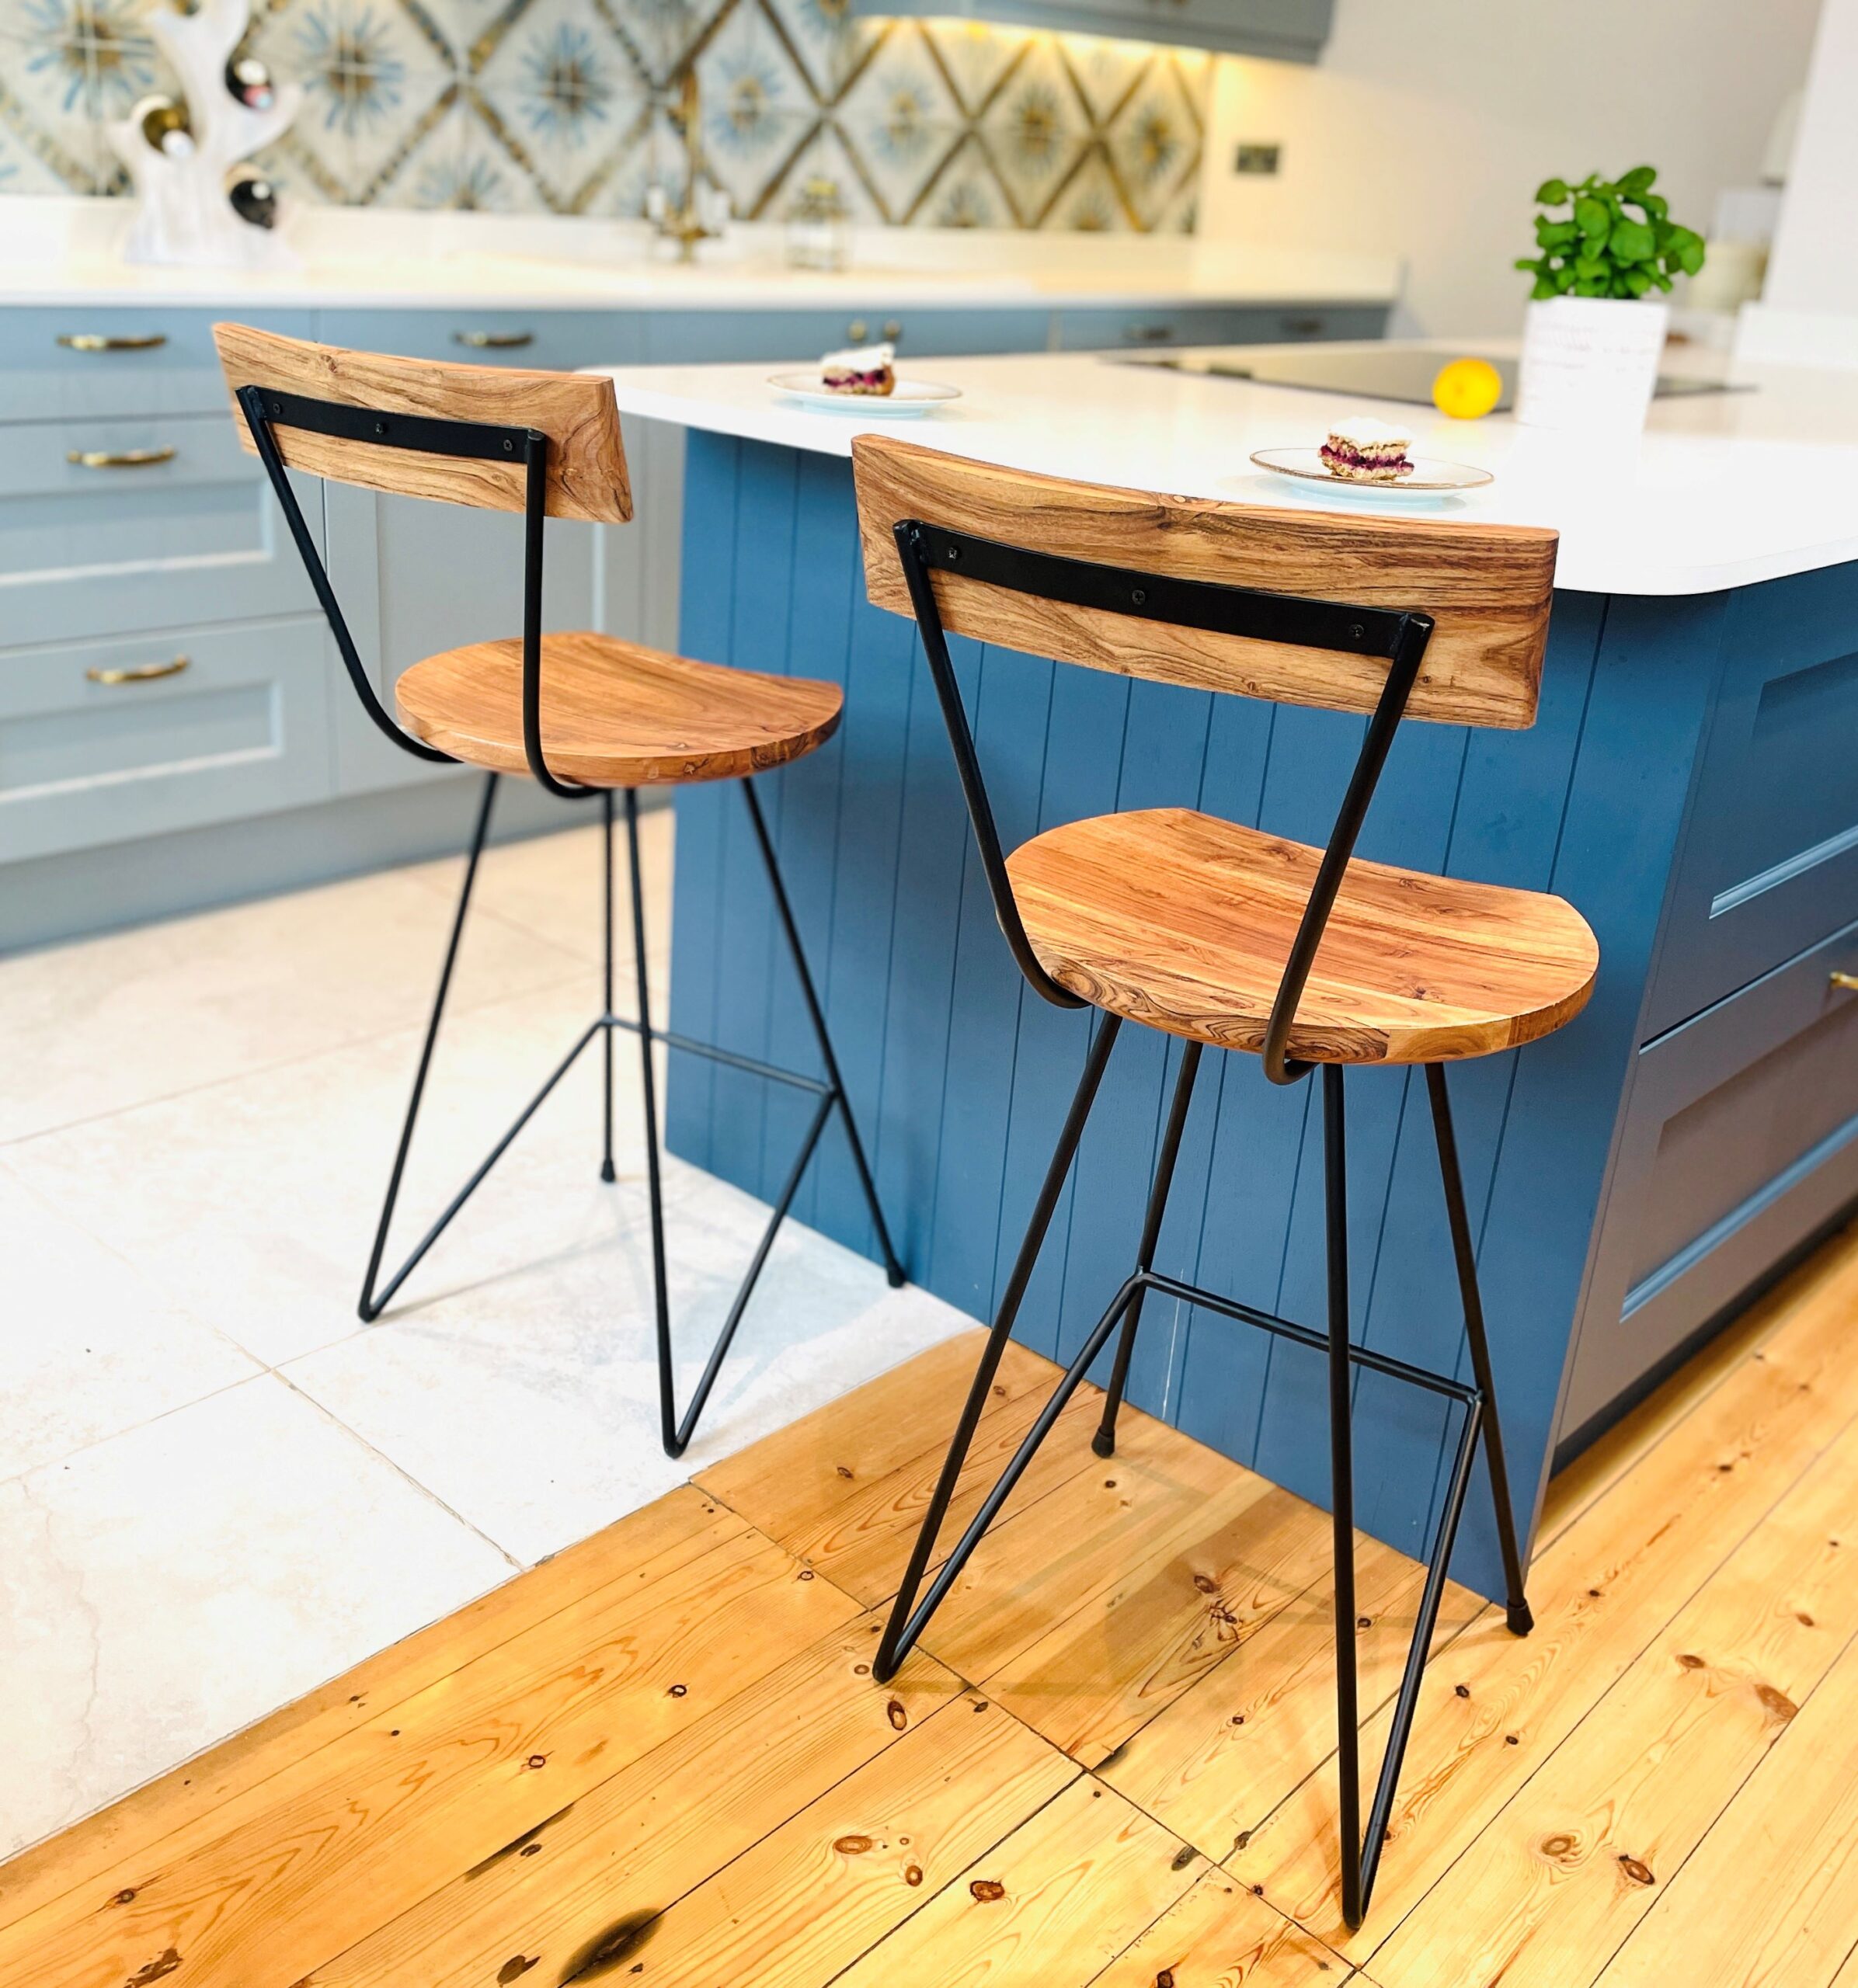 Two industrial bar stools in front of blue kitchen island on wooden floor